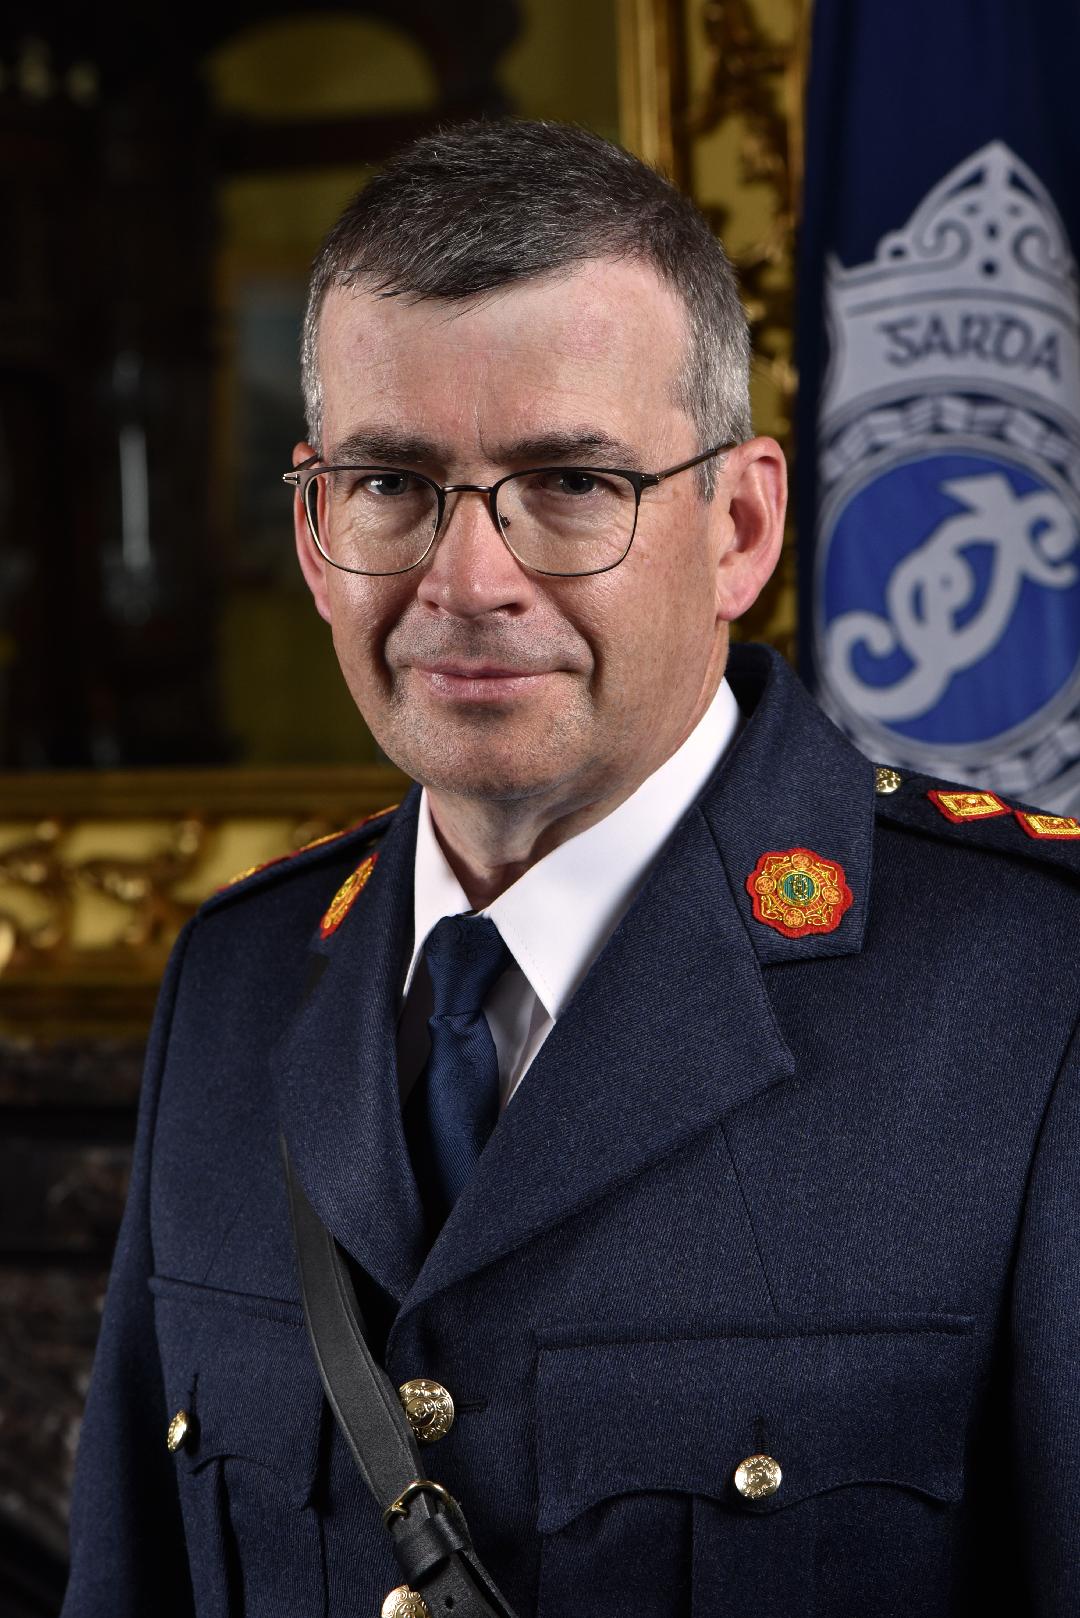 Plans to boost GSOC powers branded 'draconian' by Garda commissioner